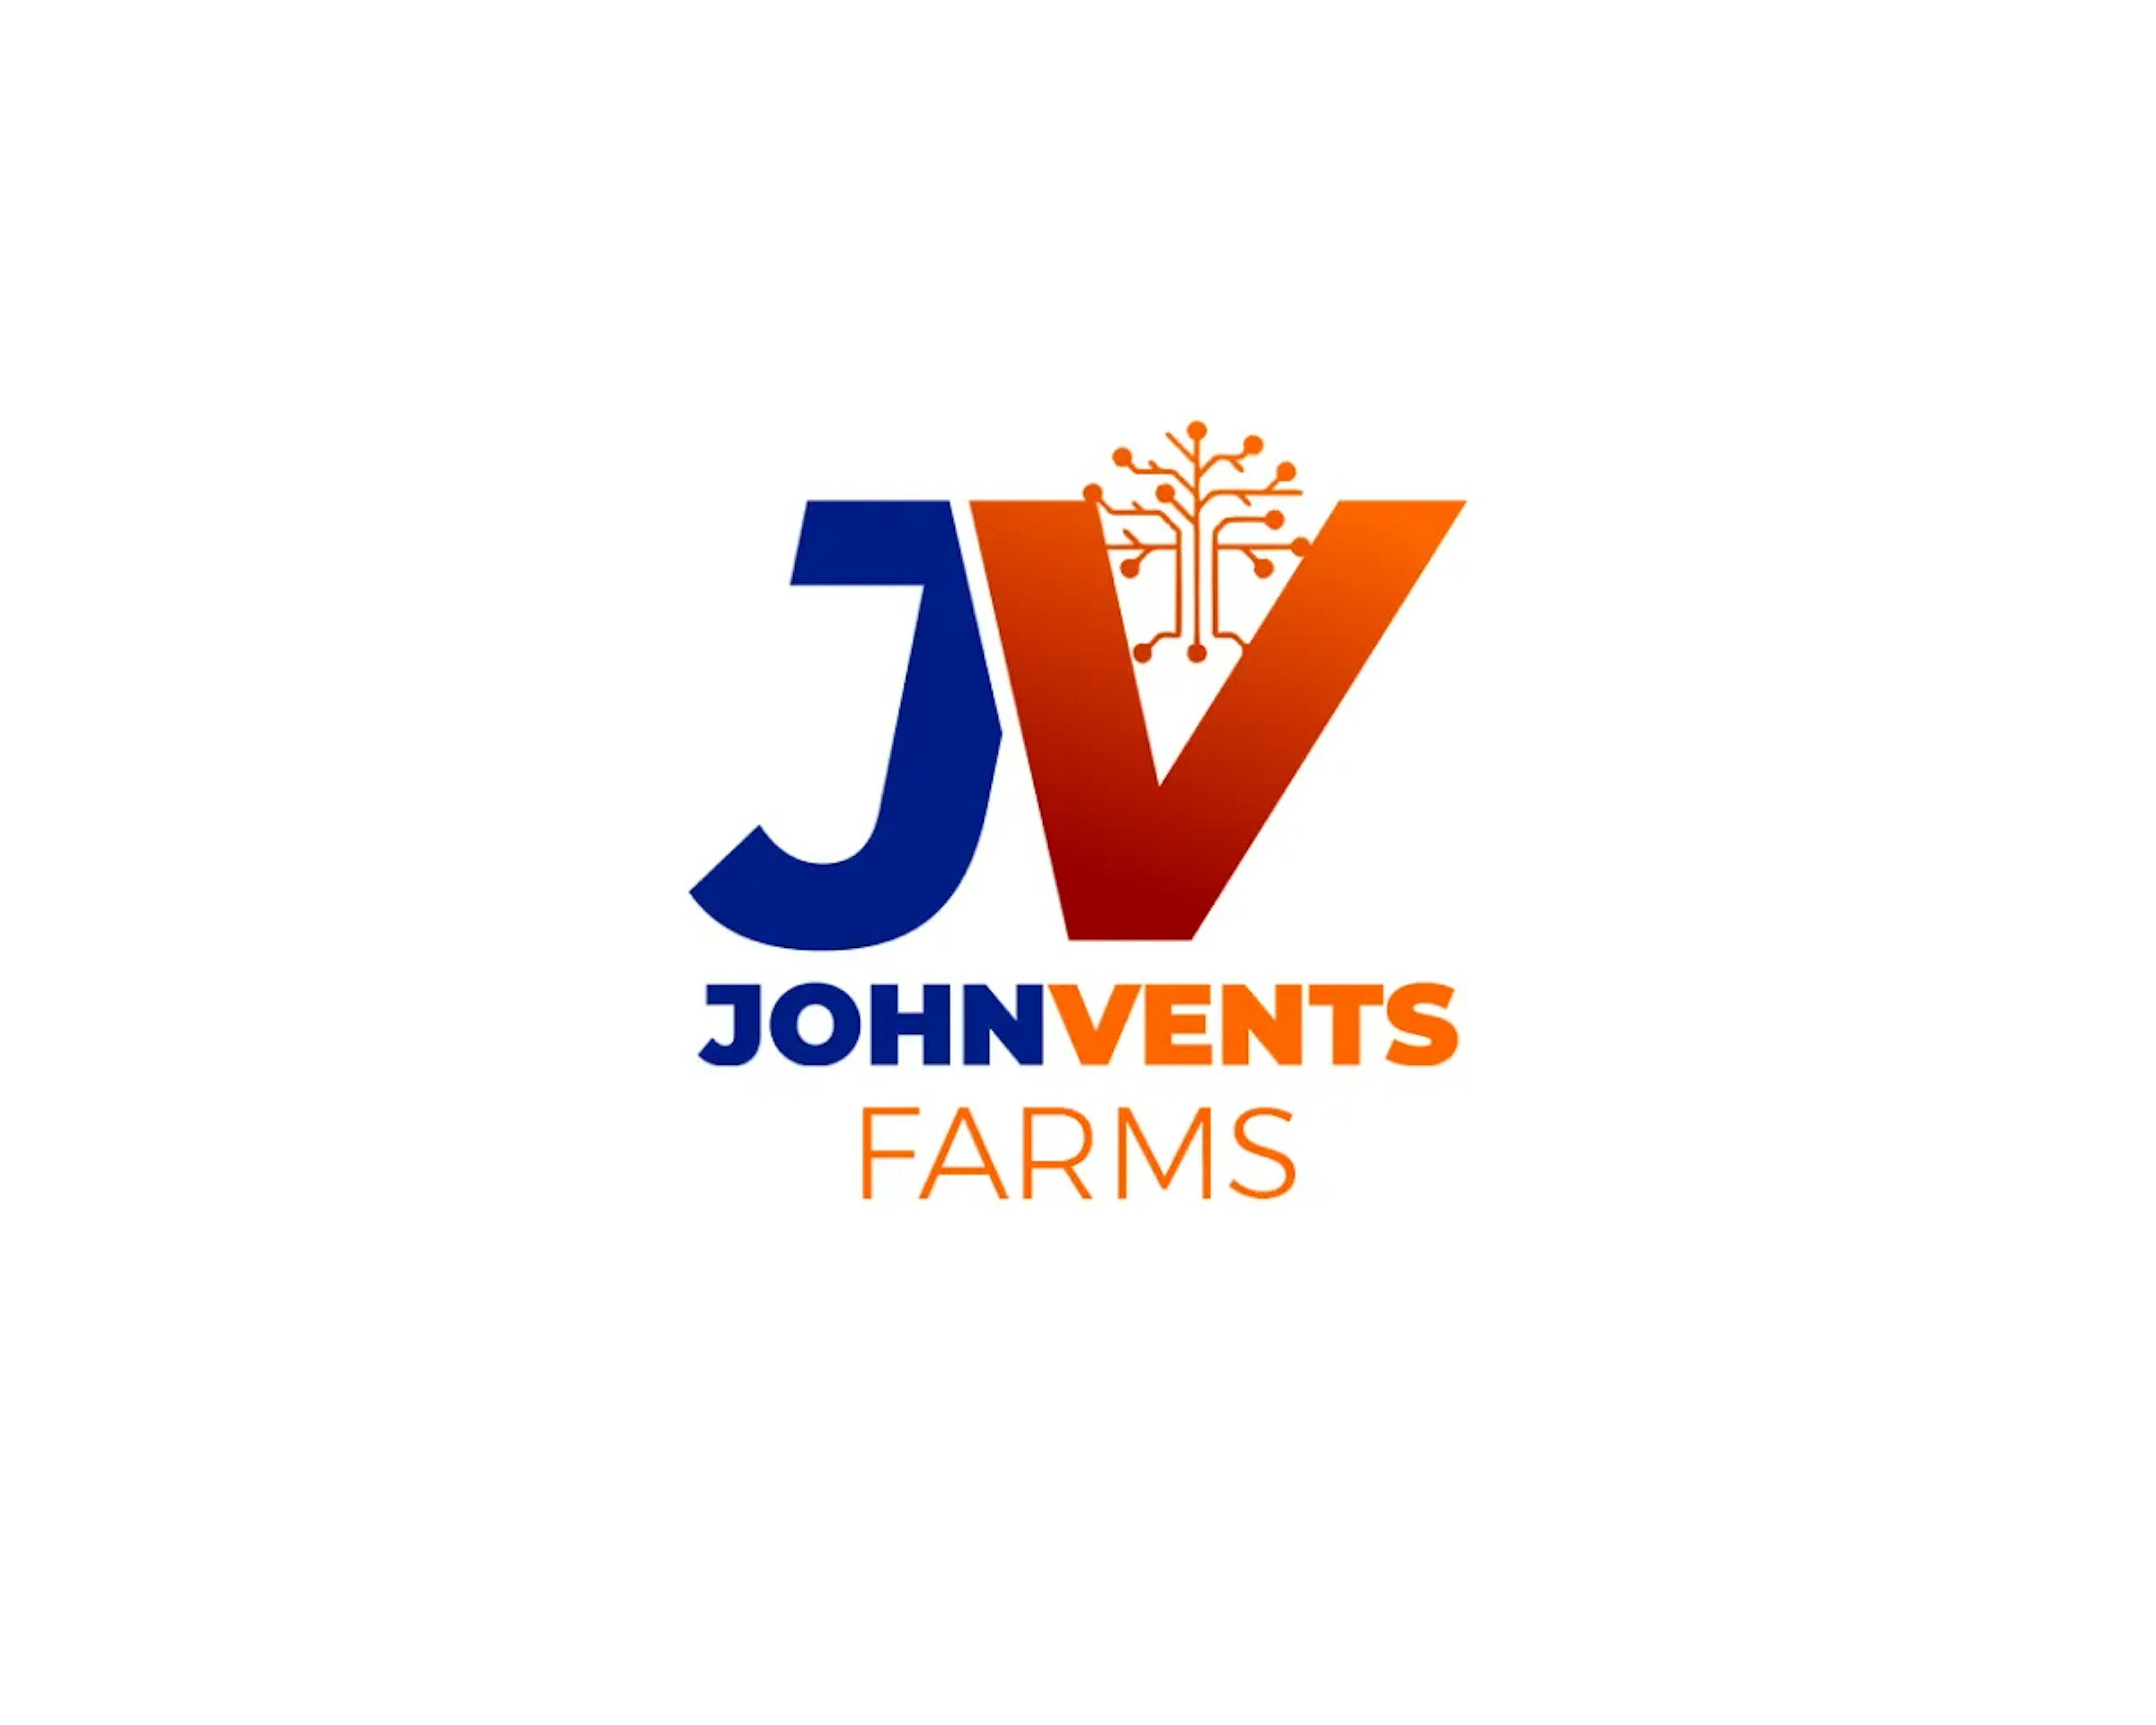 Johnvents Farms